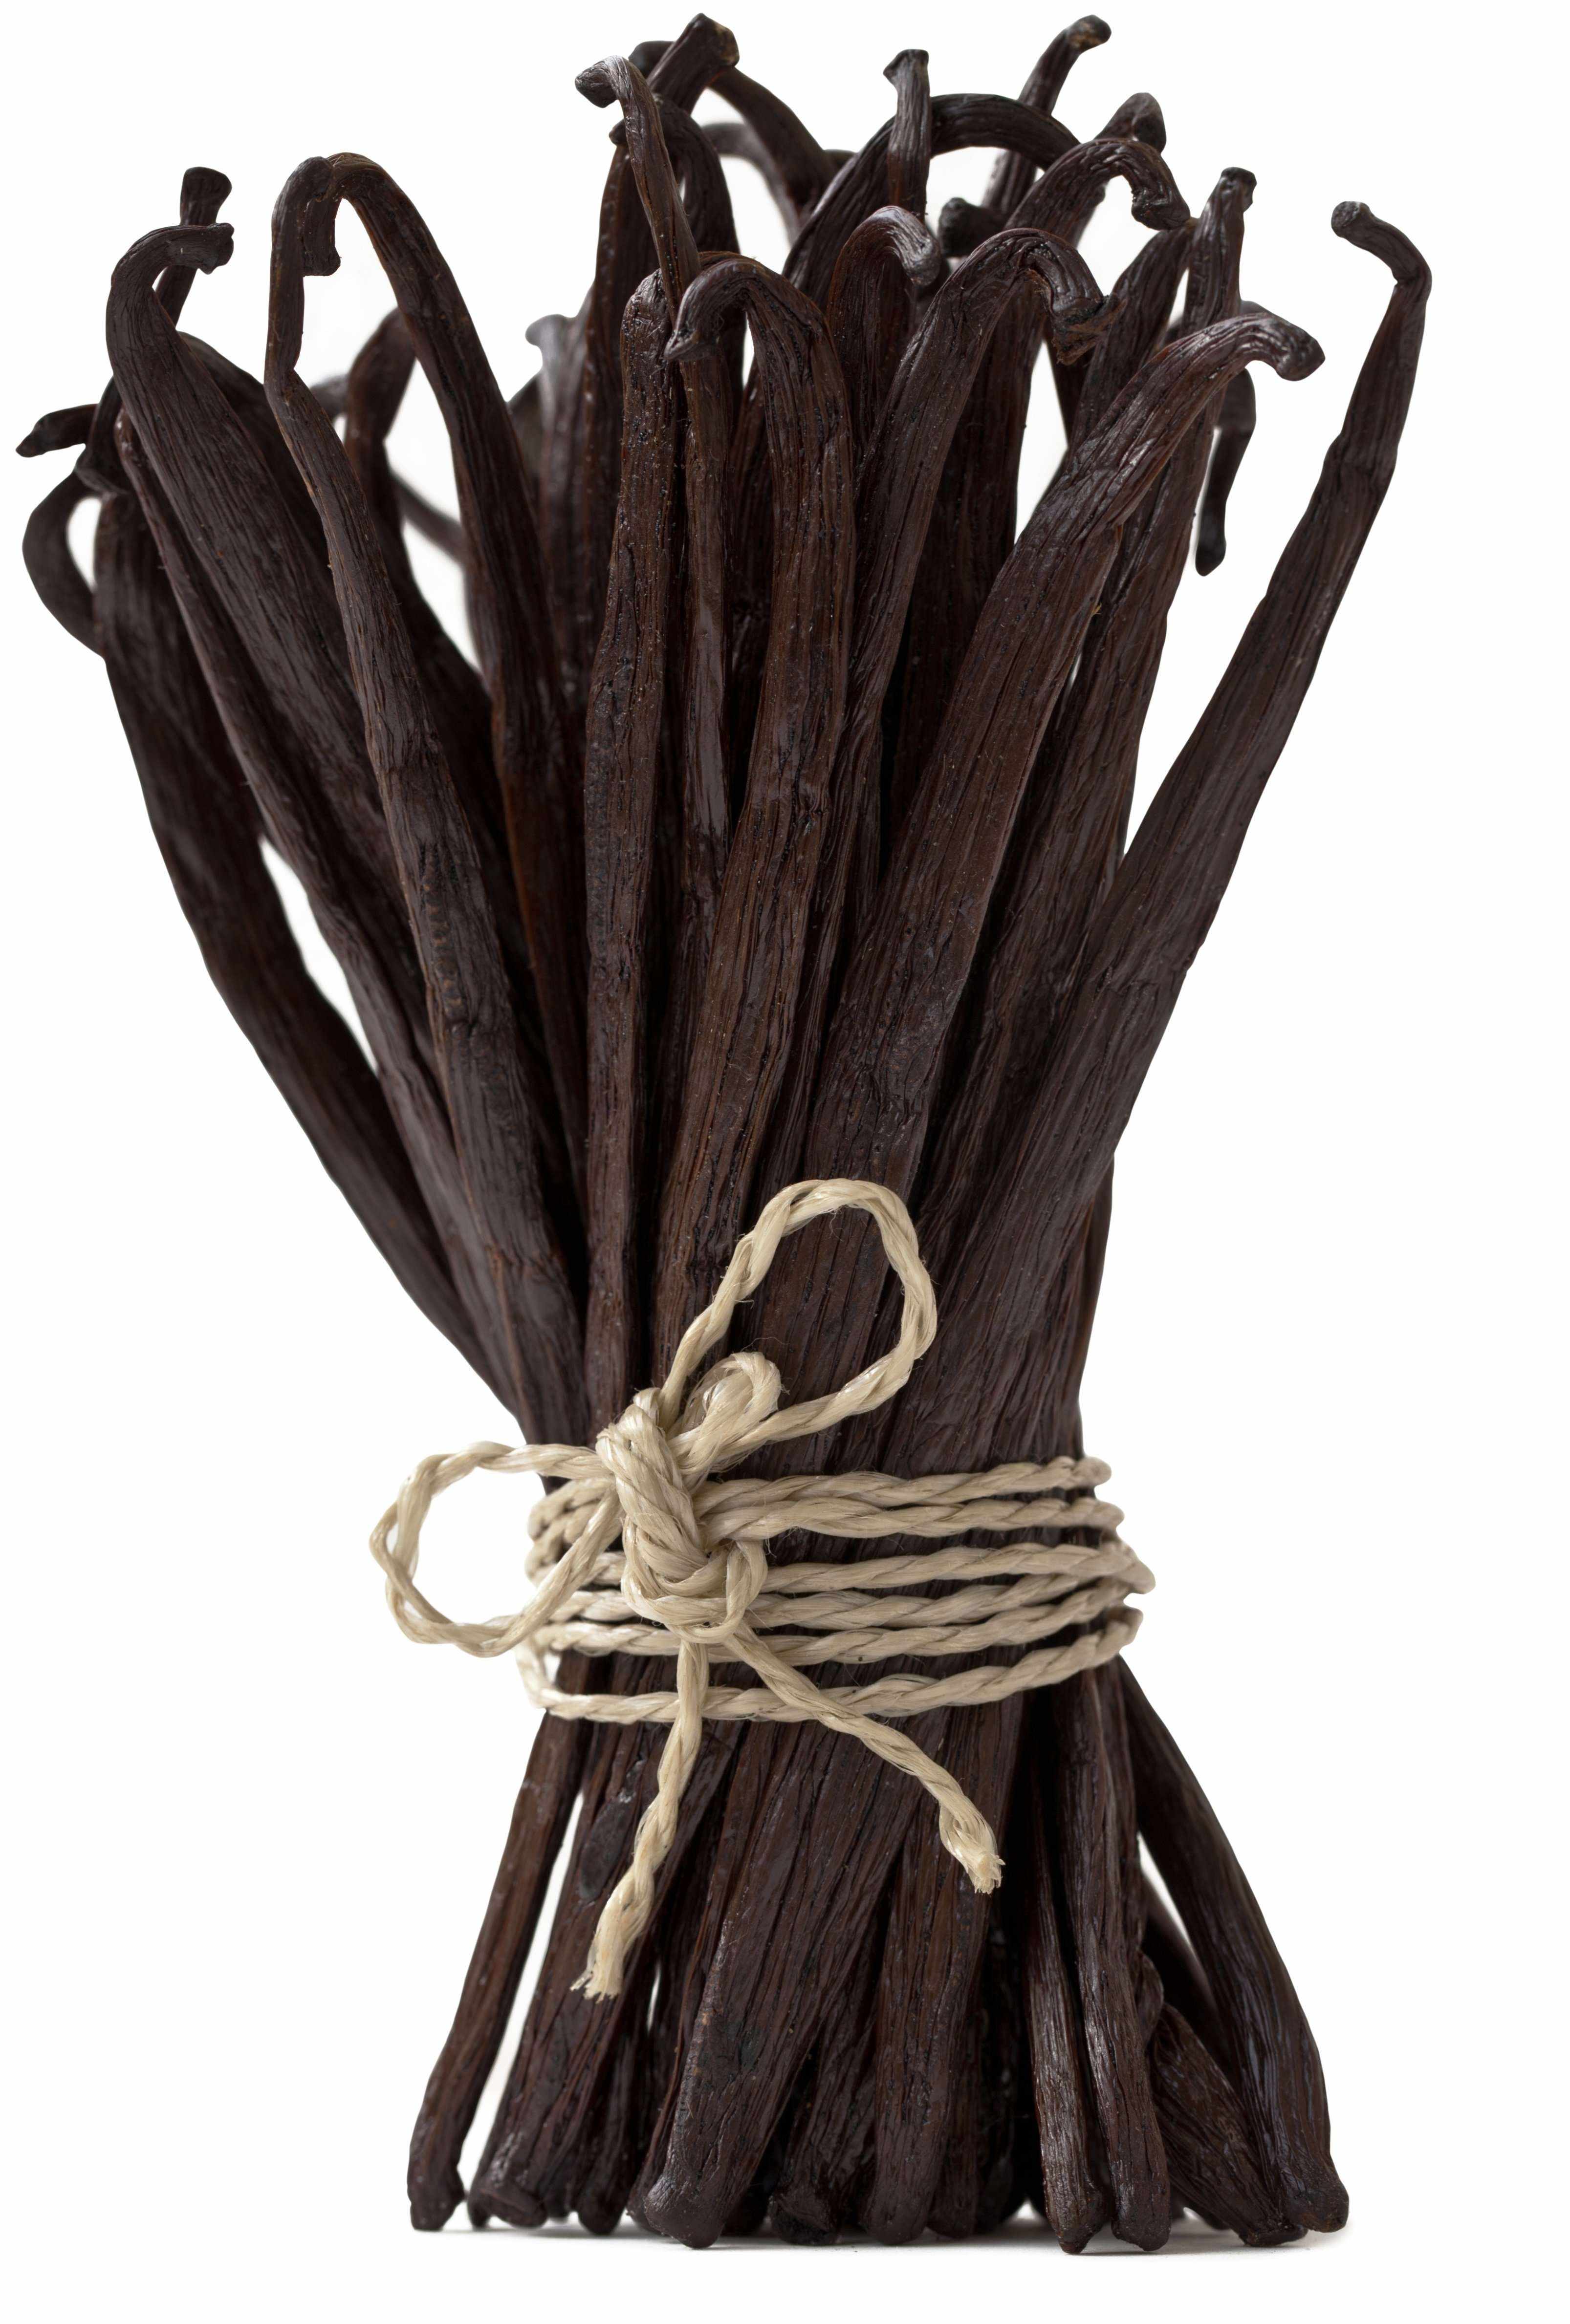 bundle of madagascar vanilla beans in upright position